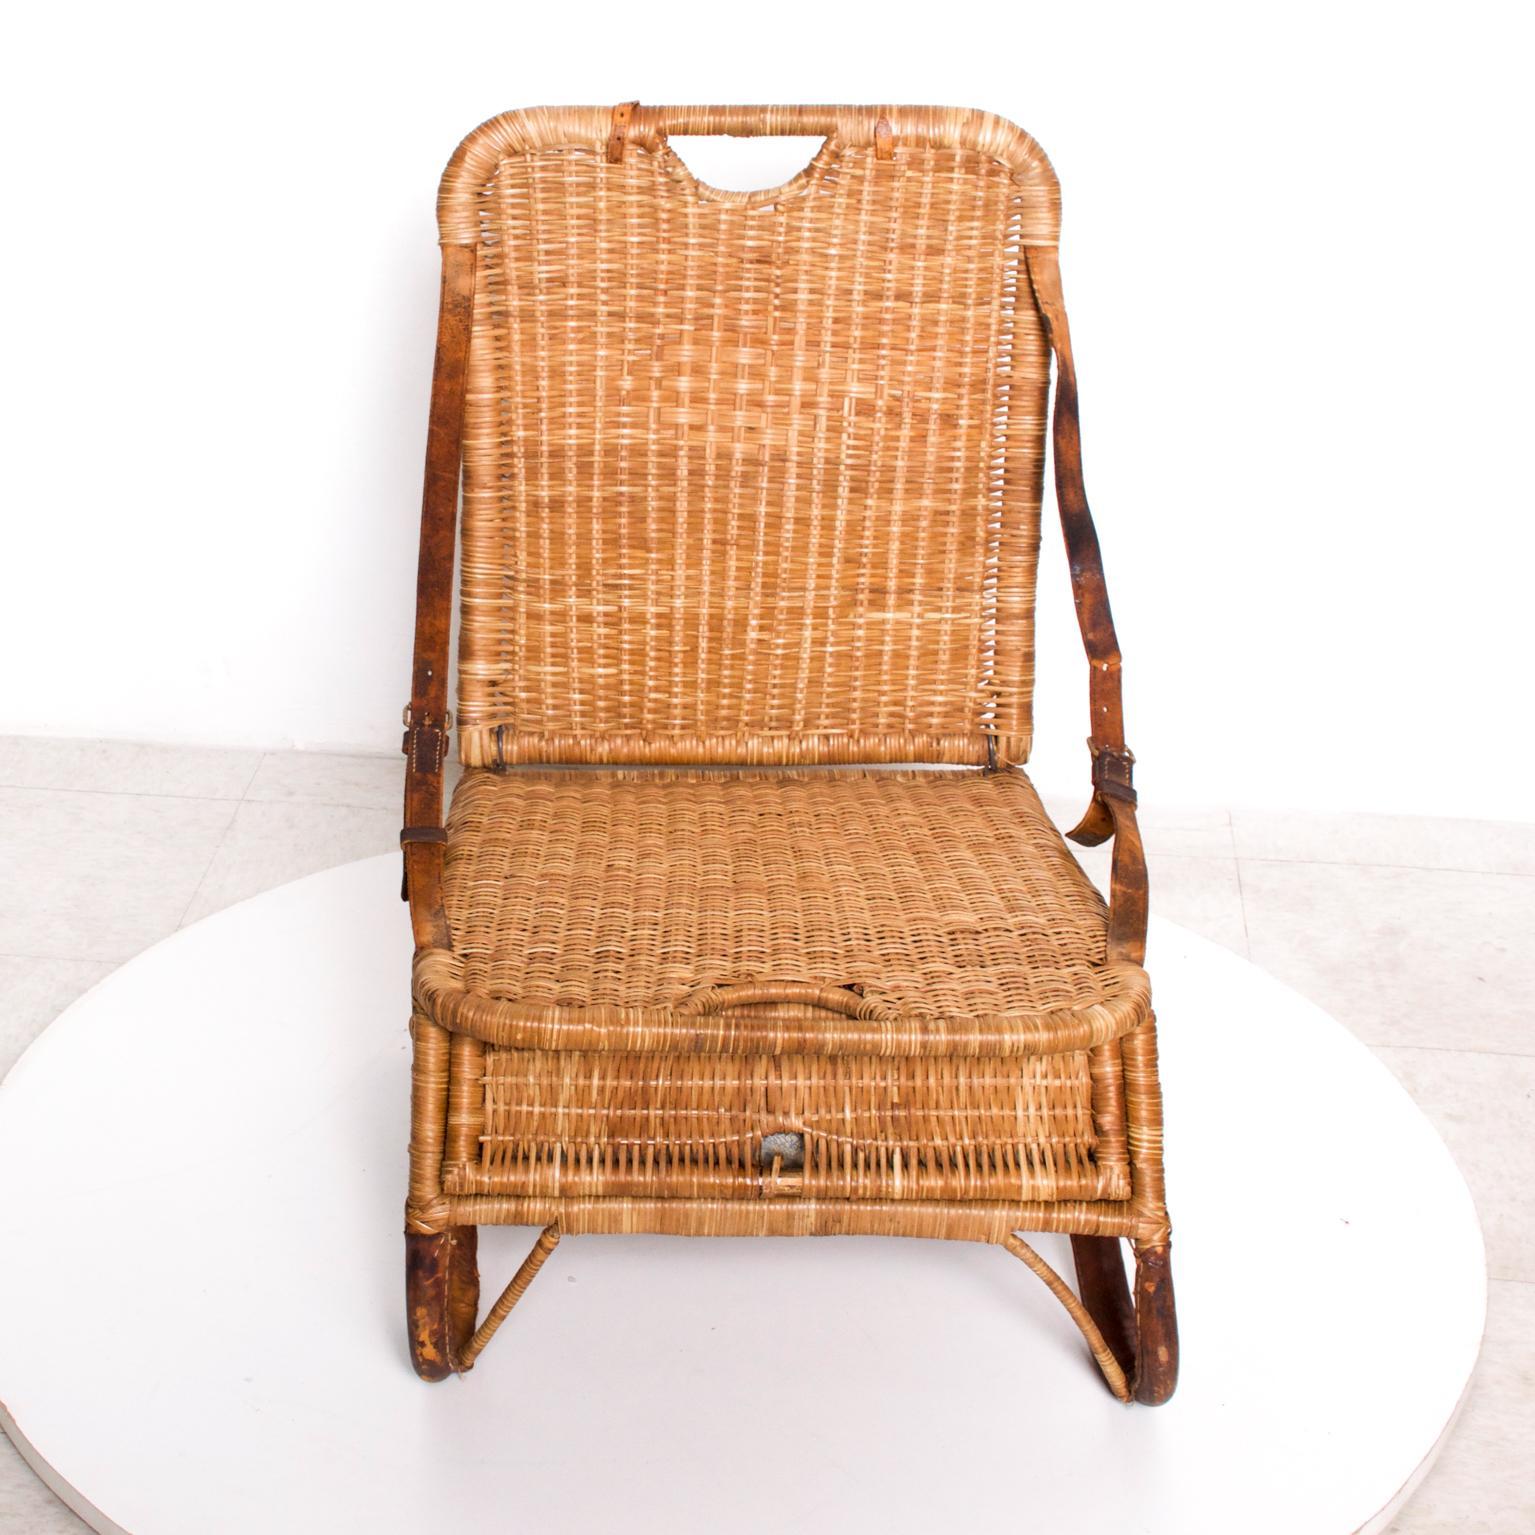 For your pleasure: compact portable traveling beach- fun in the park chair in woven wicker/rattan and leather.
Mid-century Modern Design vintage delight. Sculpted and Stylish Legs. Vintage Folding chair.
Dimensions are:29